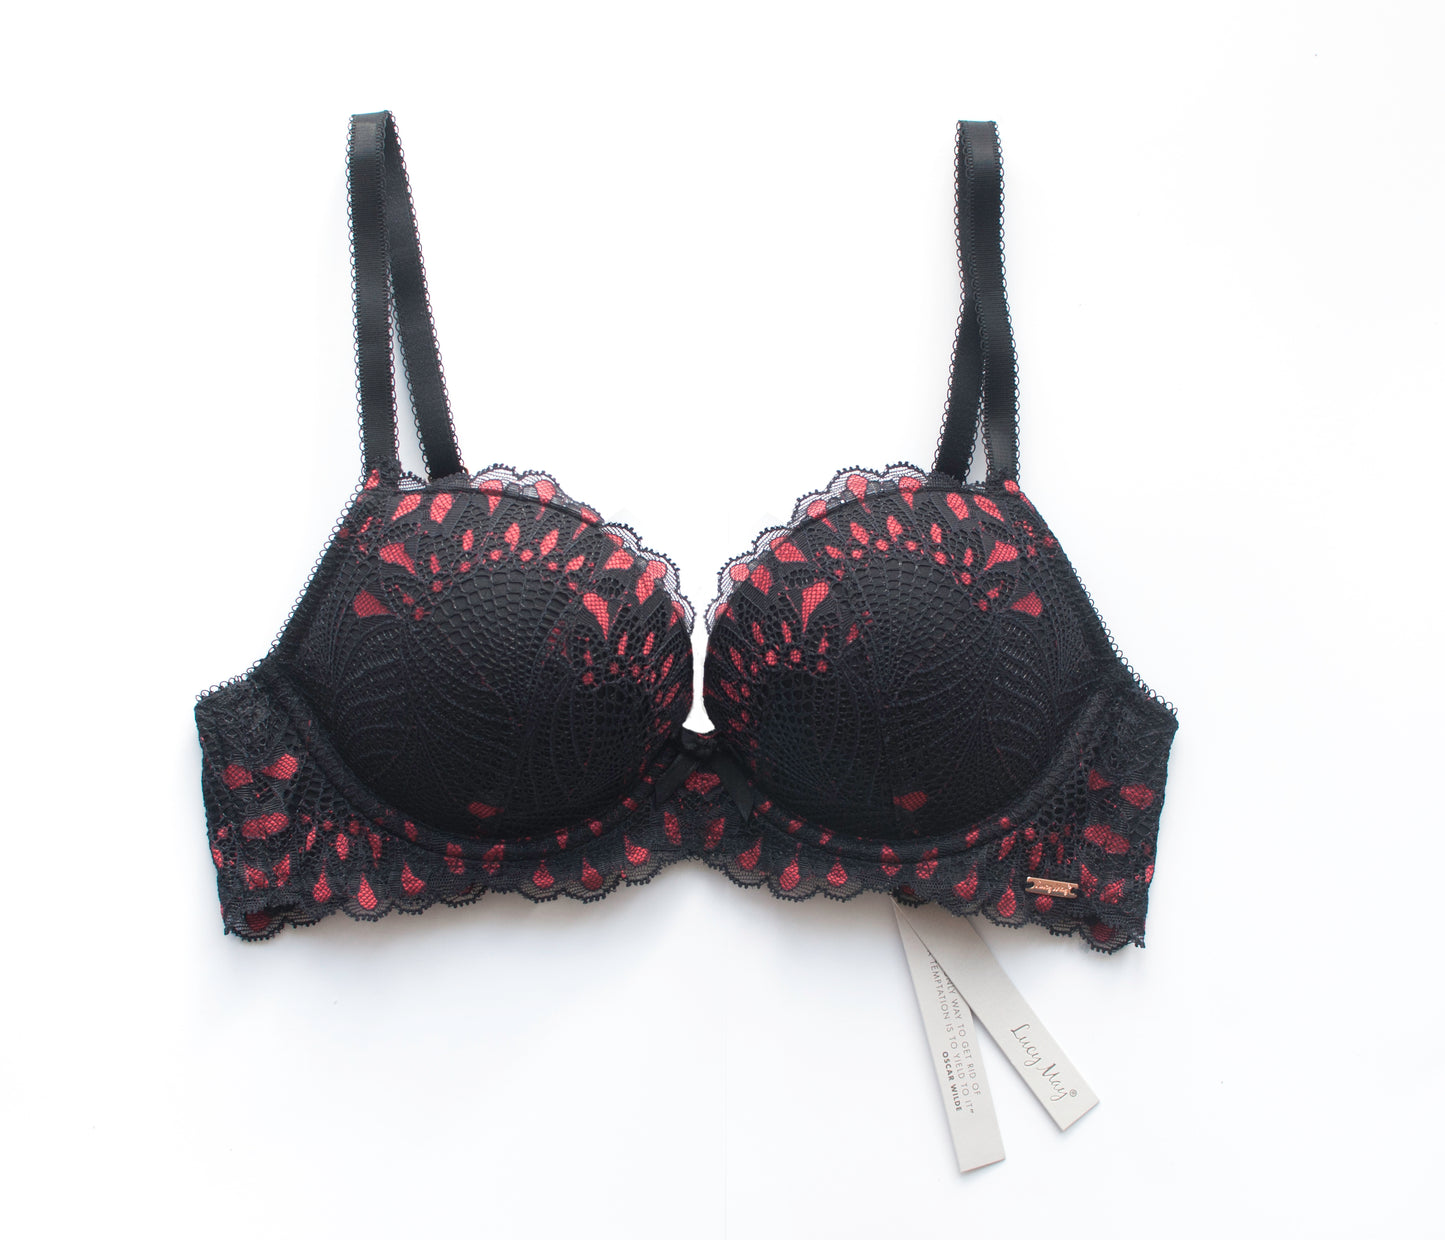 Black & red lace Lucy May Maybella Demi Plunge padded bra